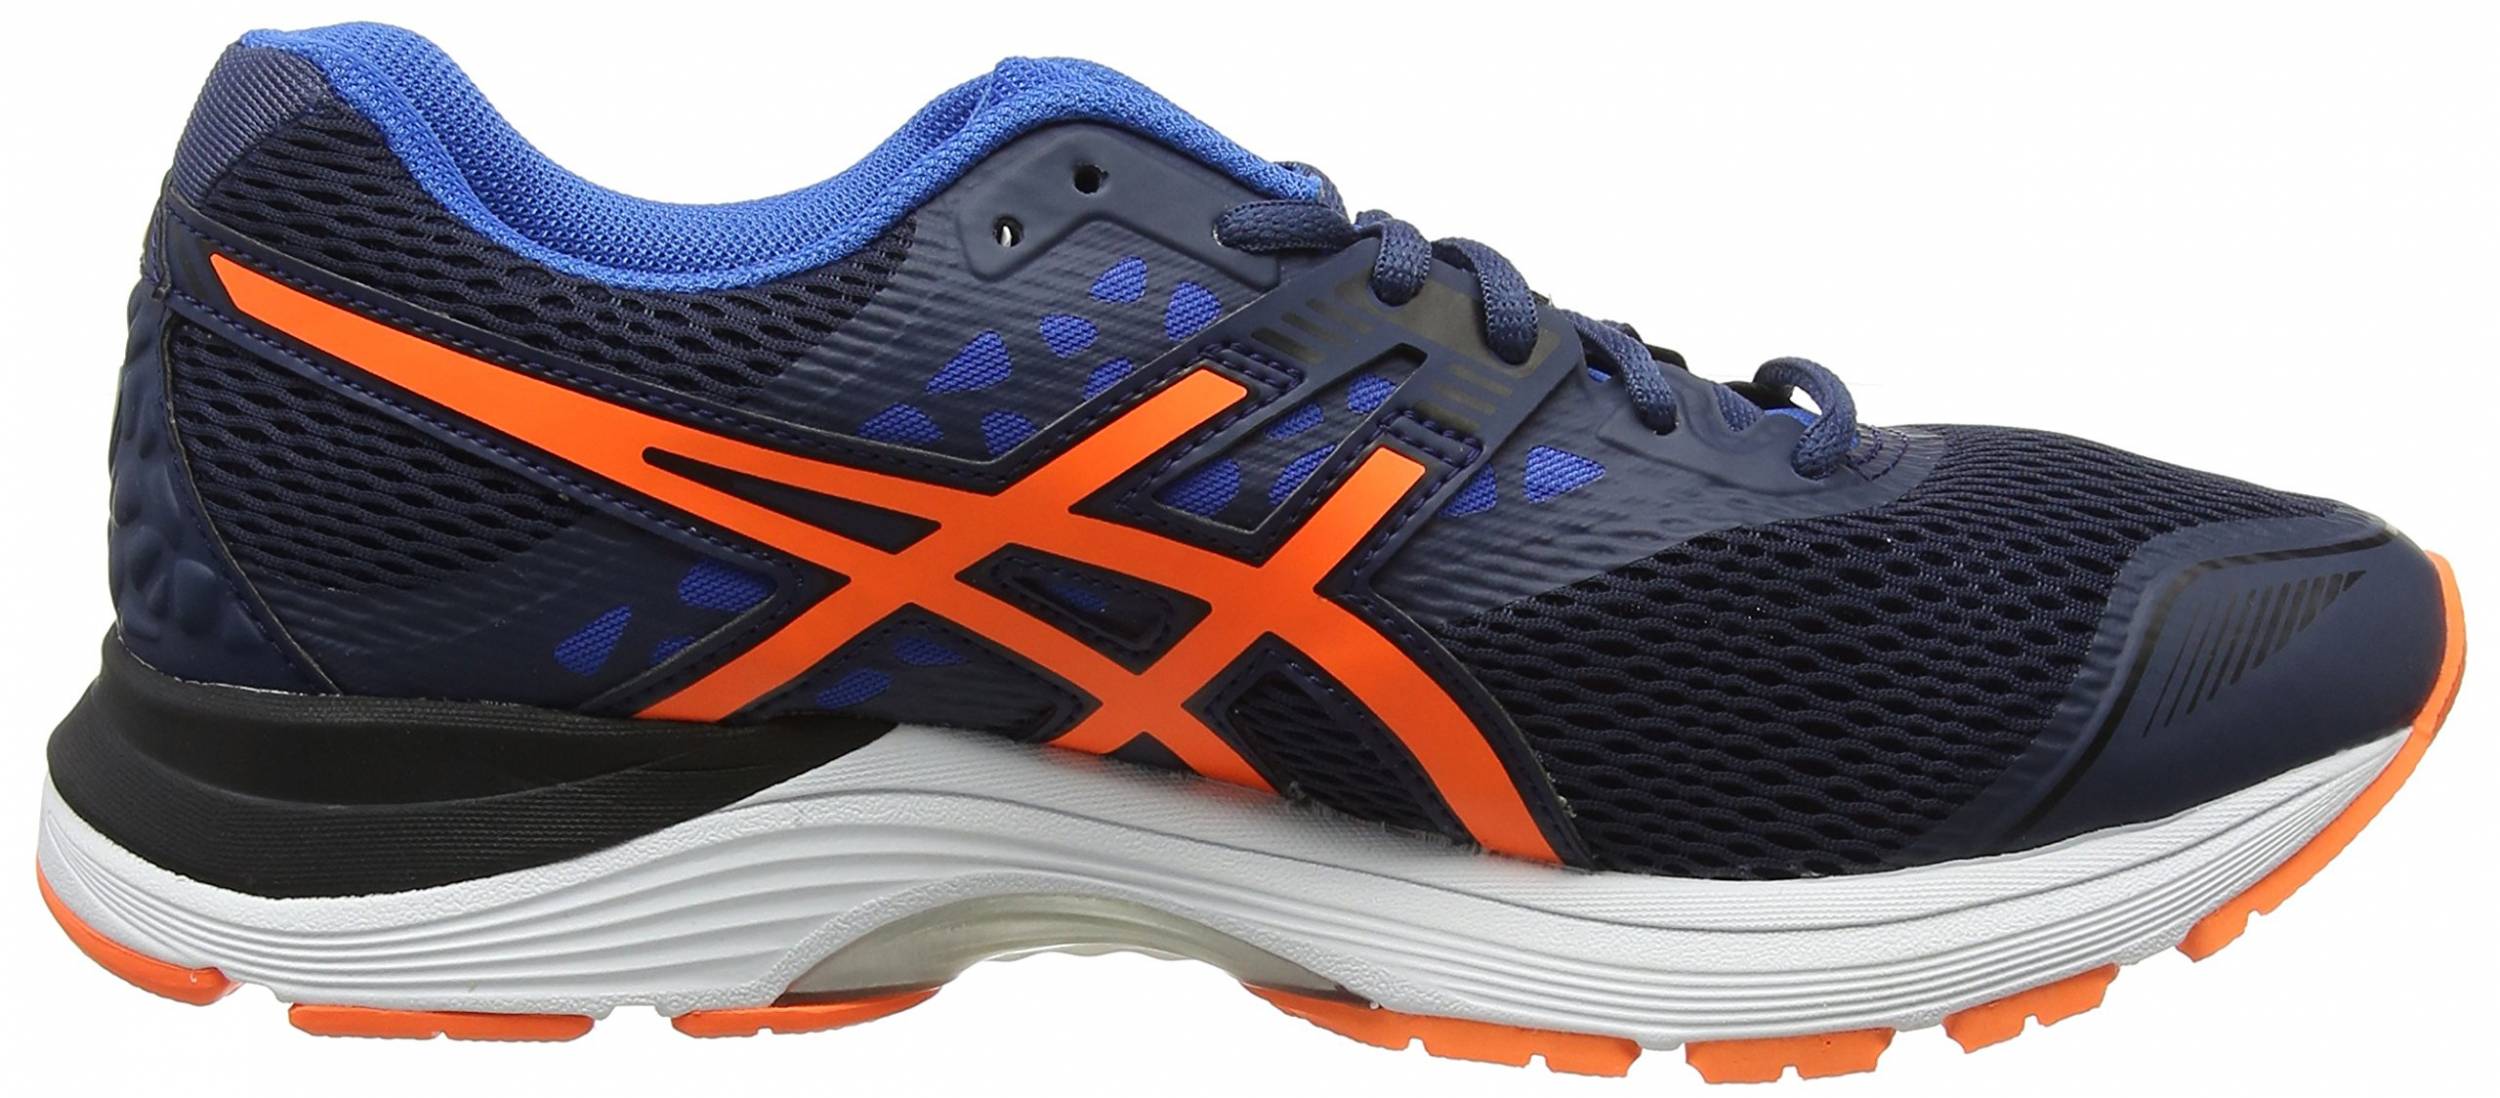 Only £69 + Review of Asics Gel Pulse 9 